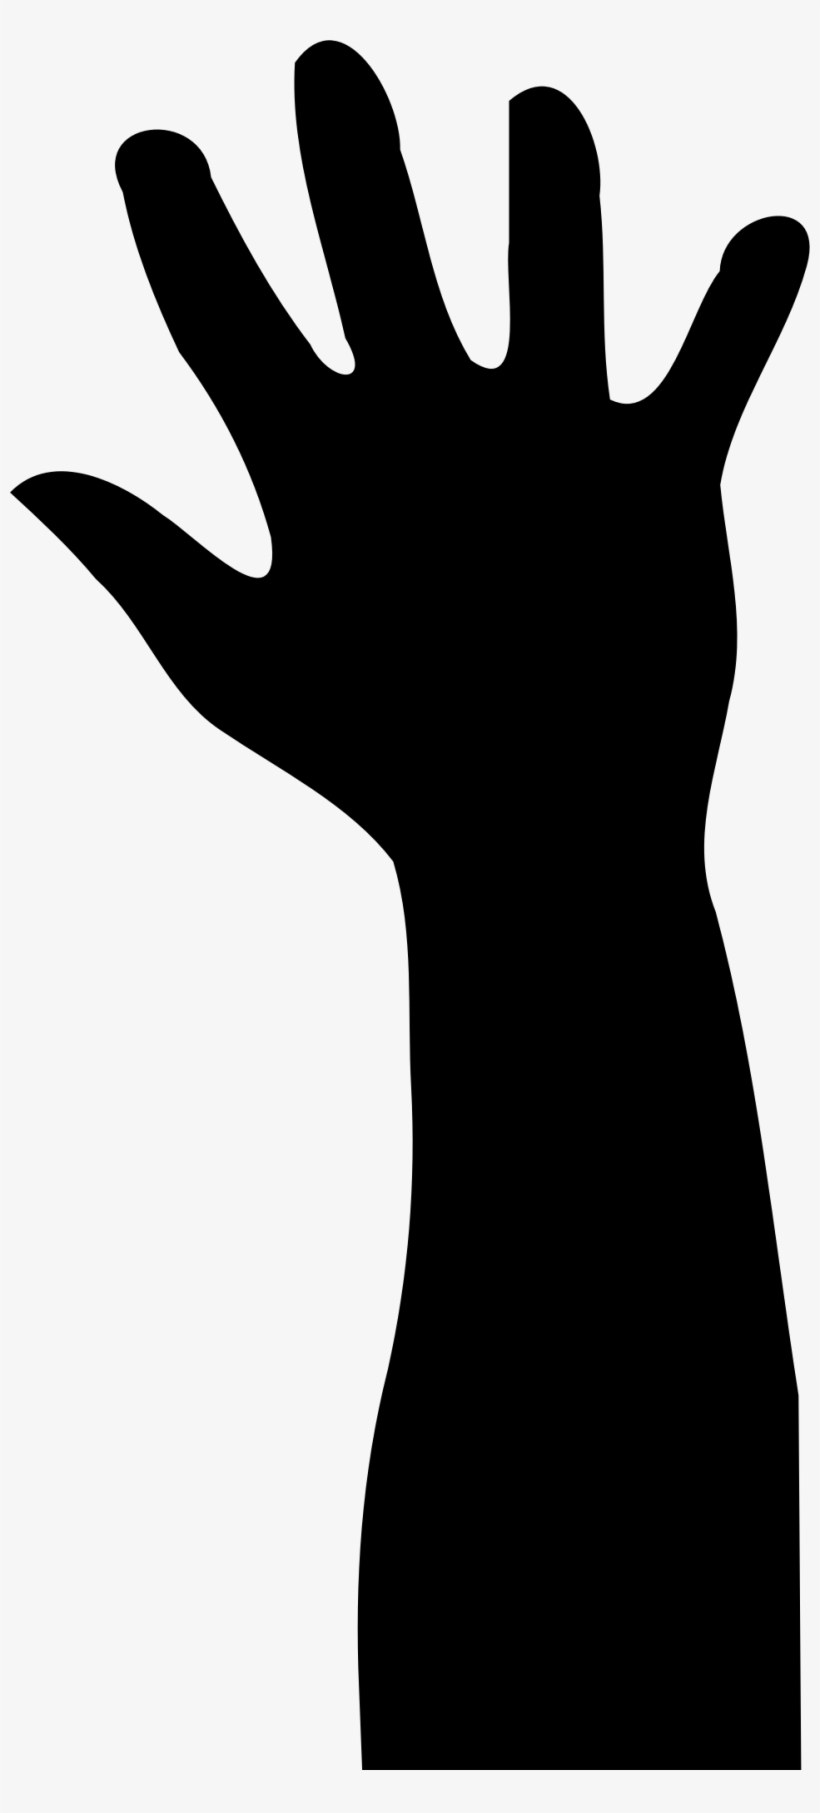 Raise Your Hand At The Silhouette - Hand Raising Silhouette, transparent png #96941